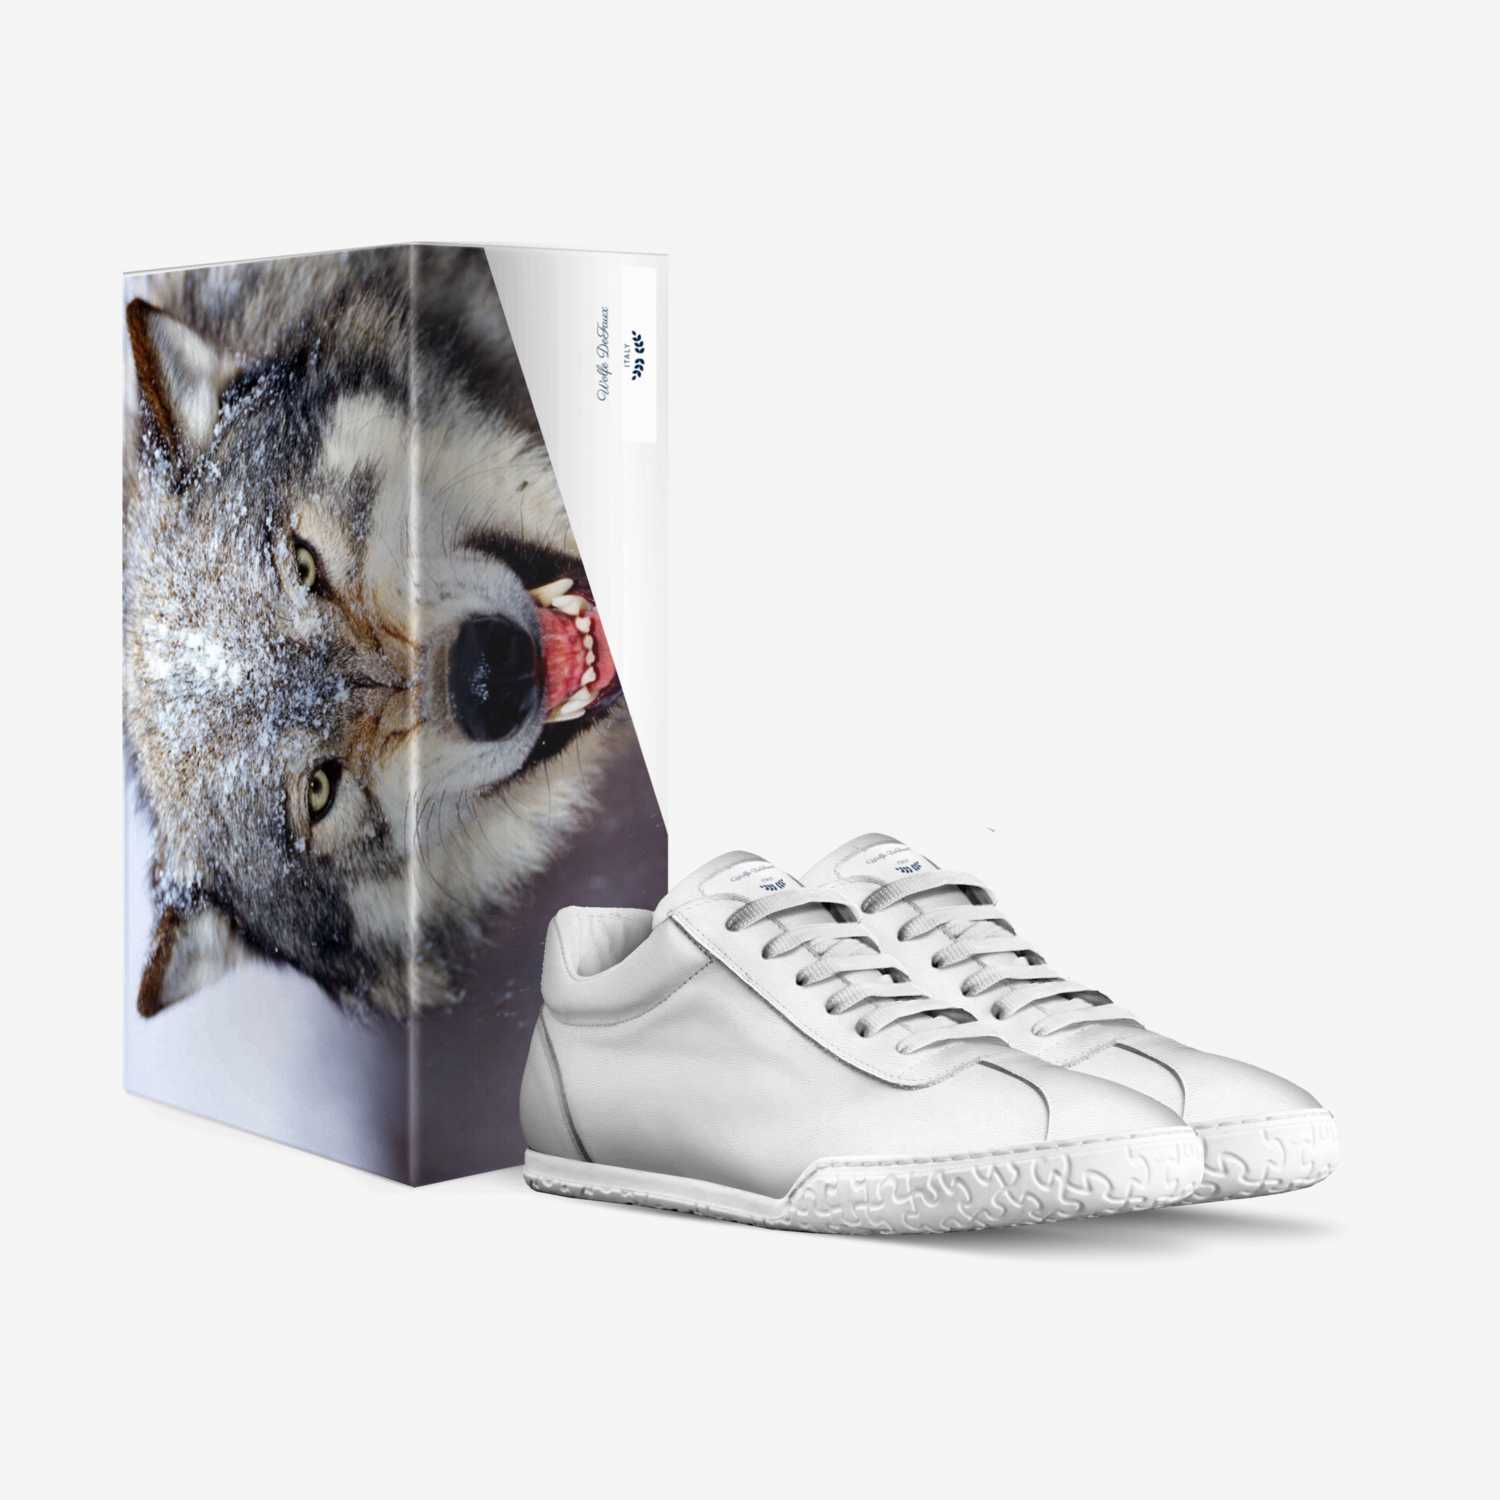 Winter wolfe custom made in Italy shoes by Jay Keese | Box view